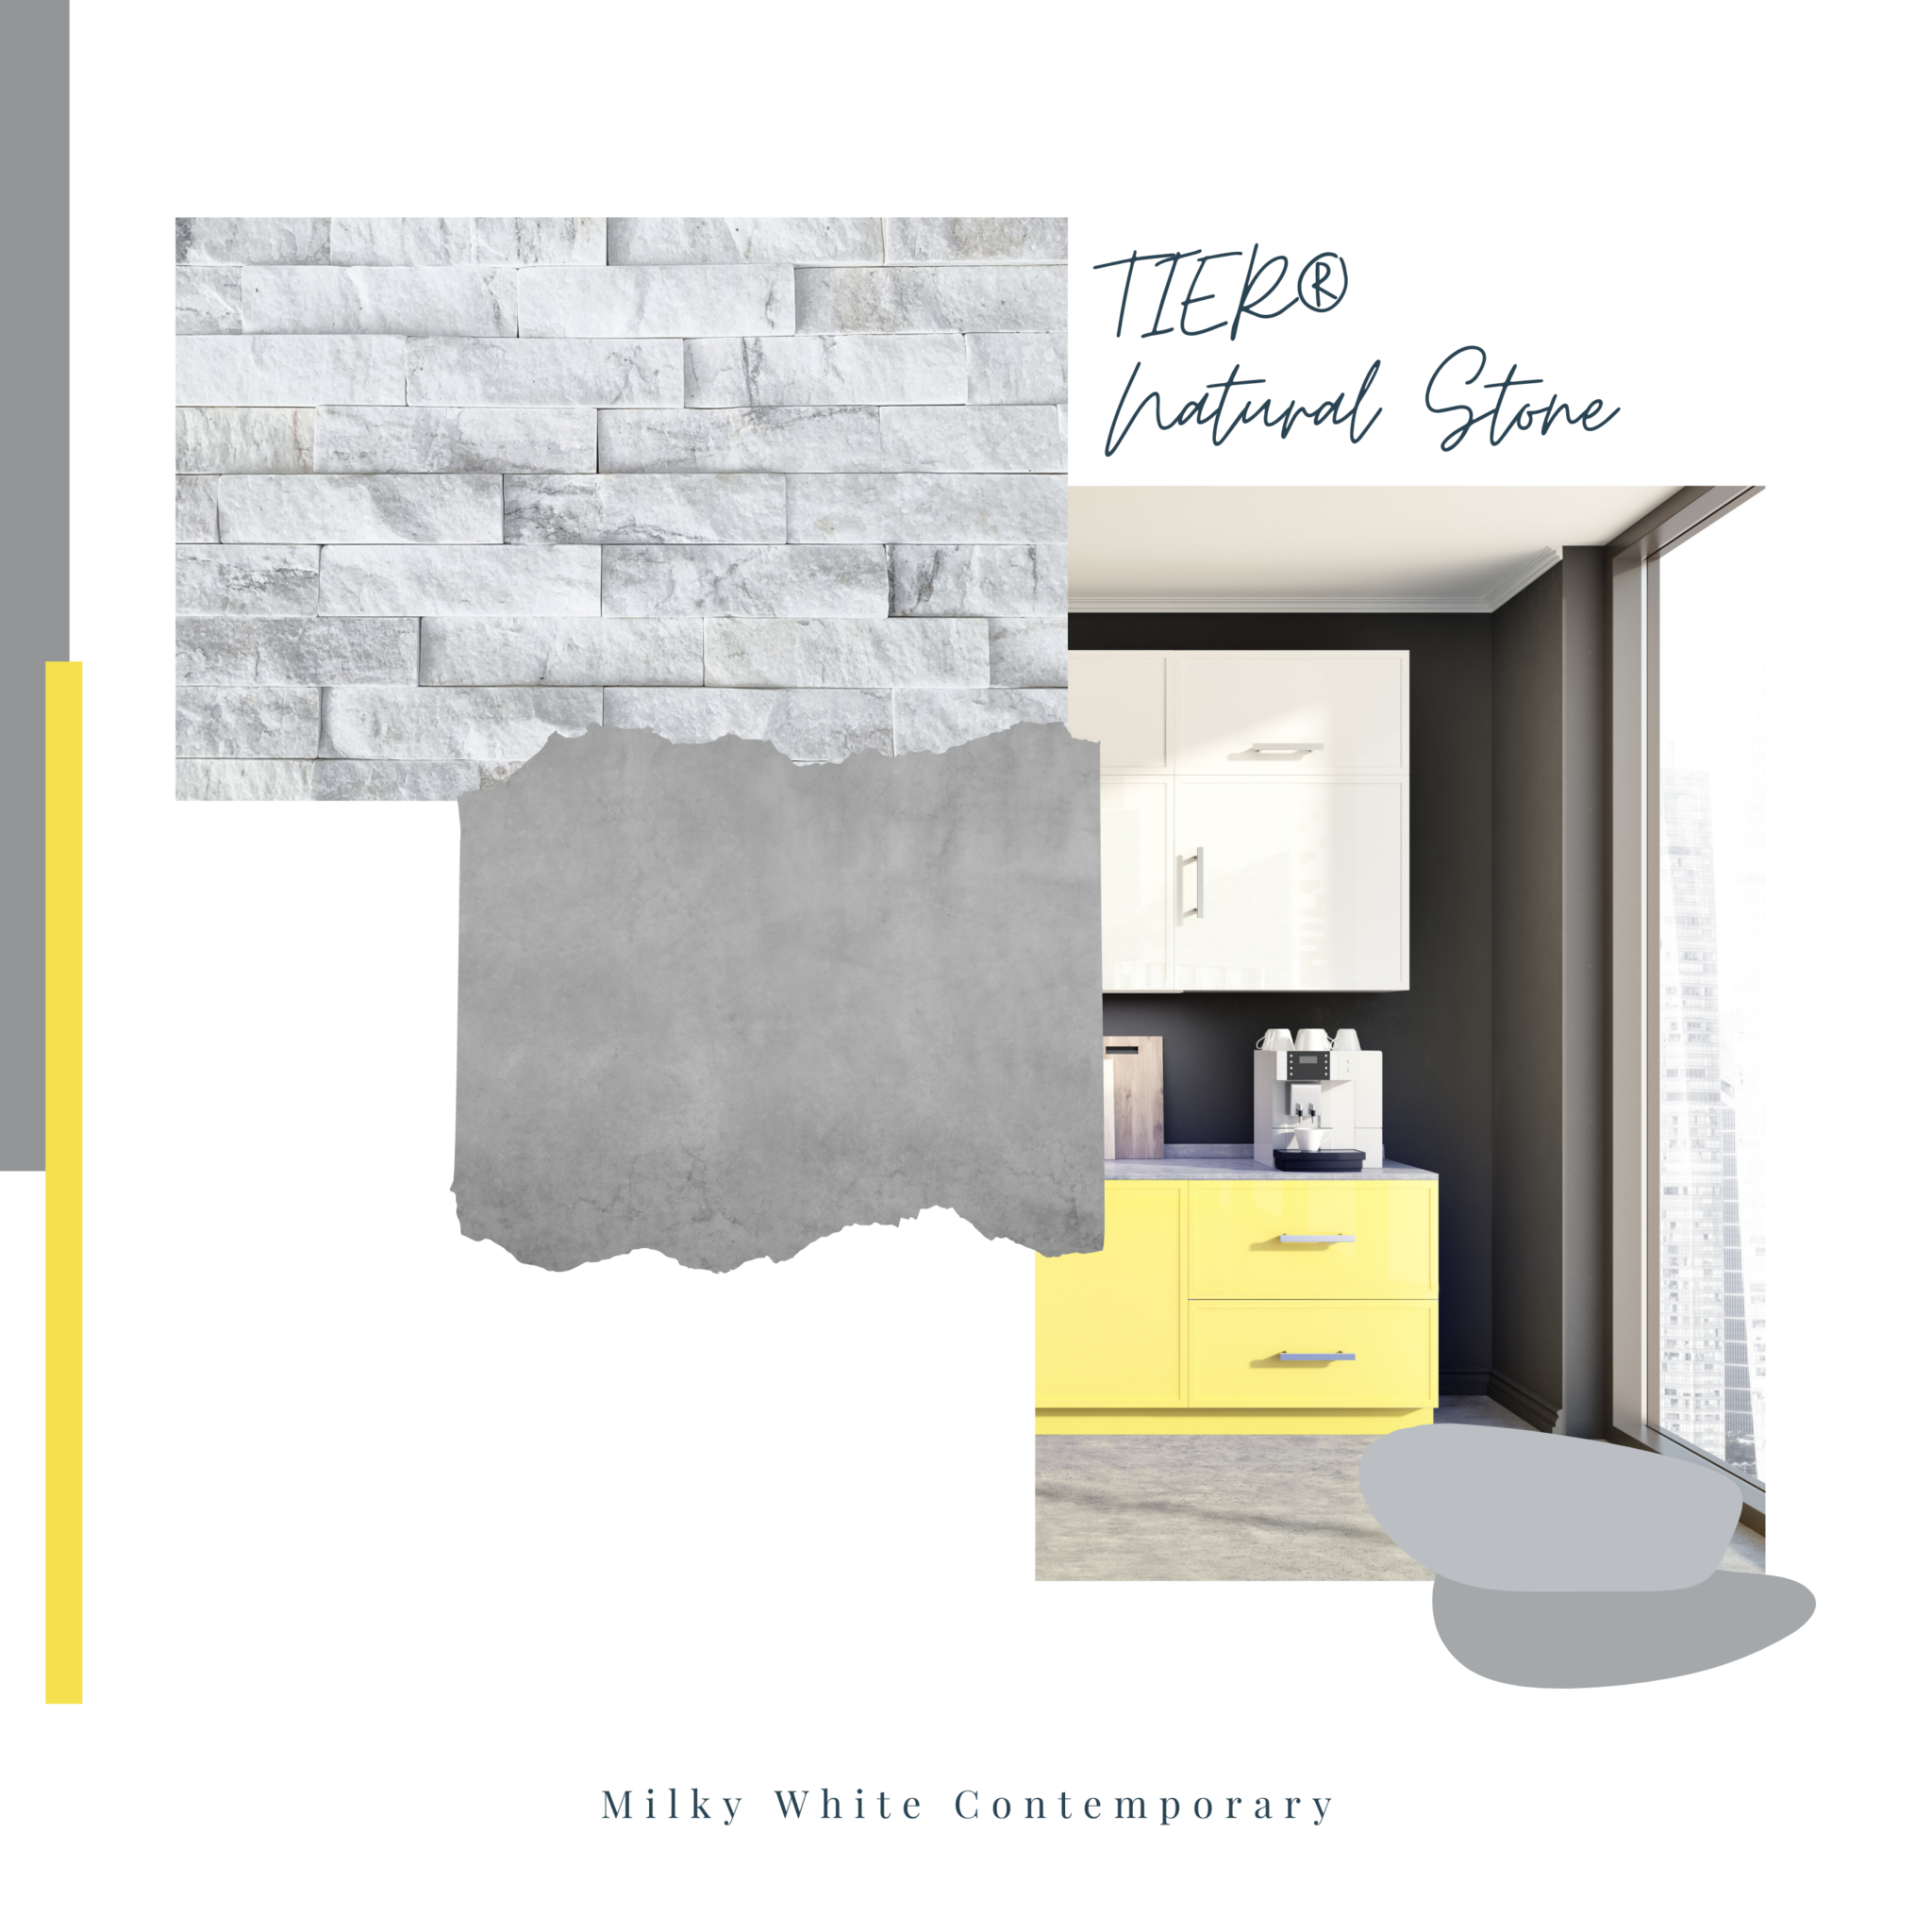 How to Pair 2021's Pantone Colors with our Stone Veneers - TIER® Natural Stone